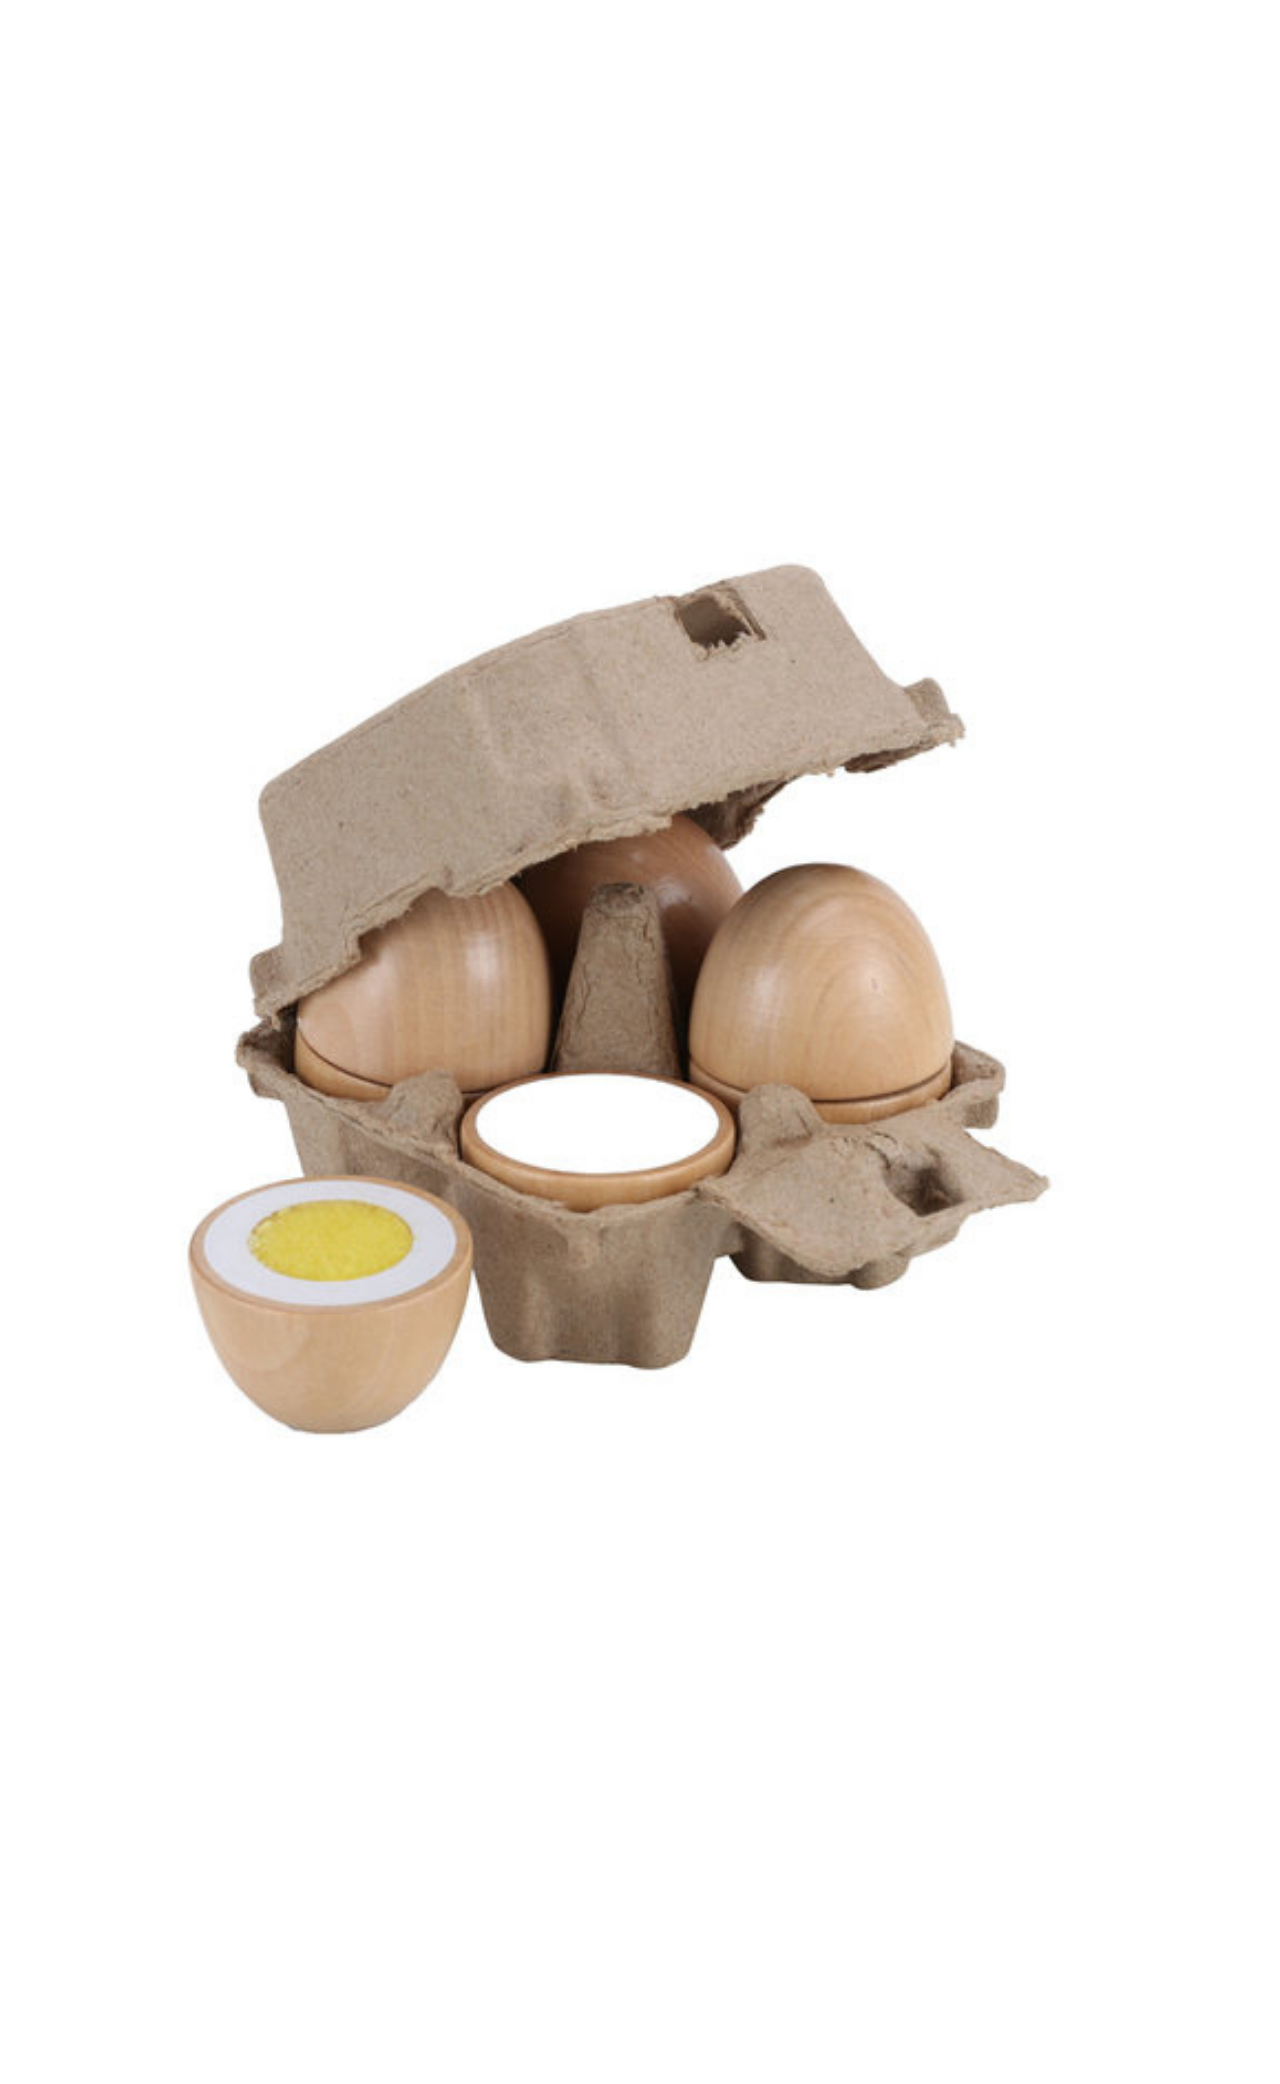 *NEW Wooden egg toy